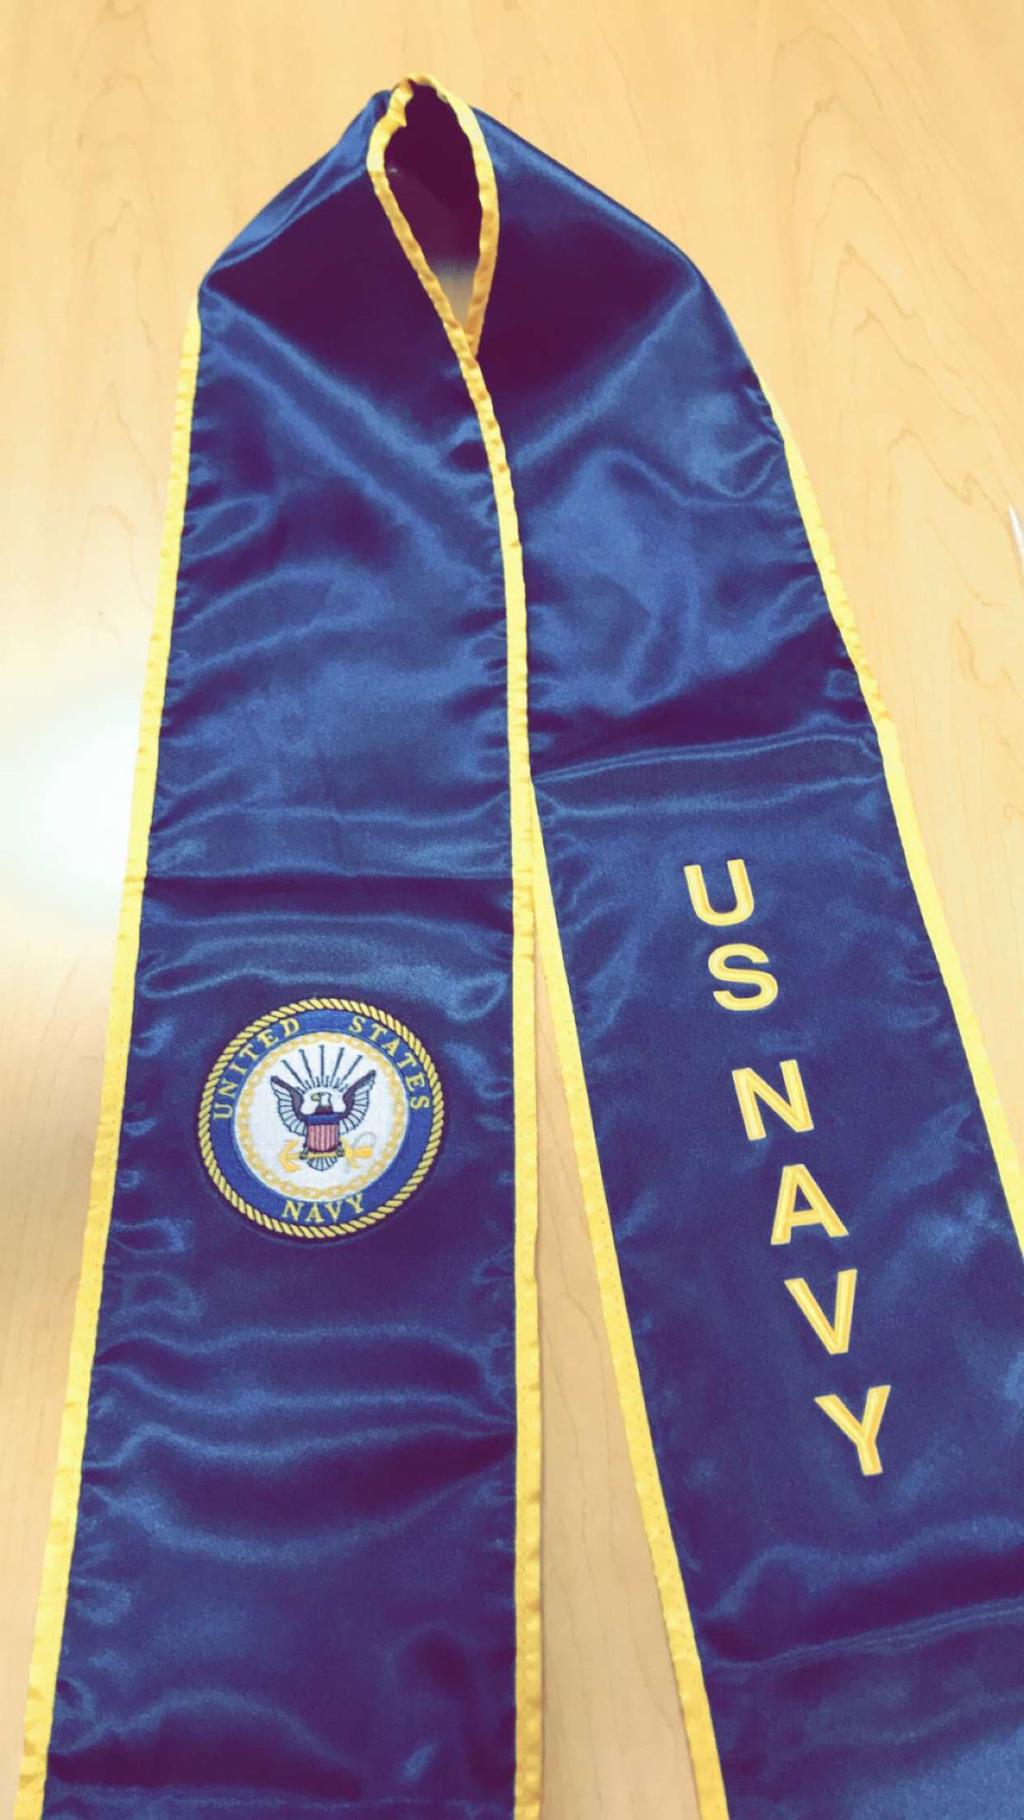 Students At Highland Told They Cannot Wear Military Stoles During